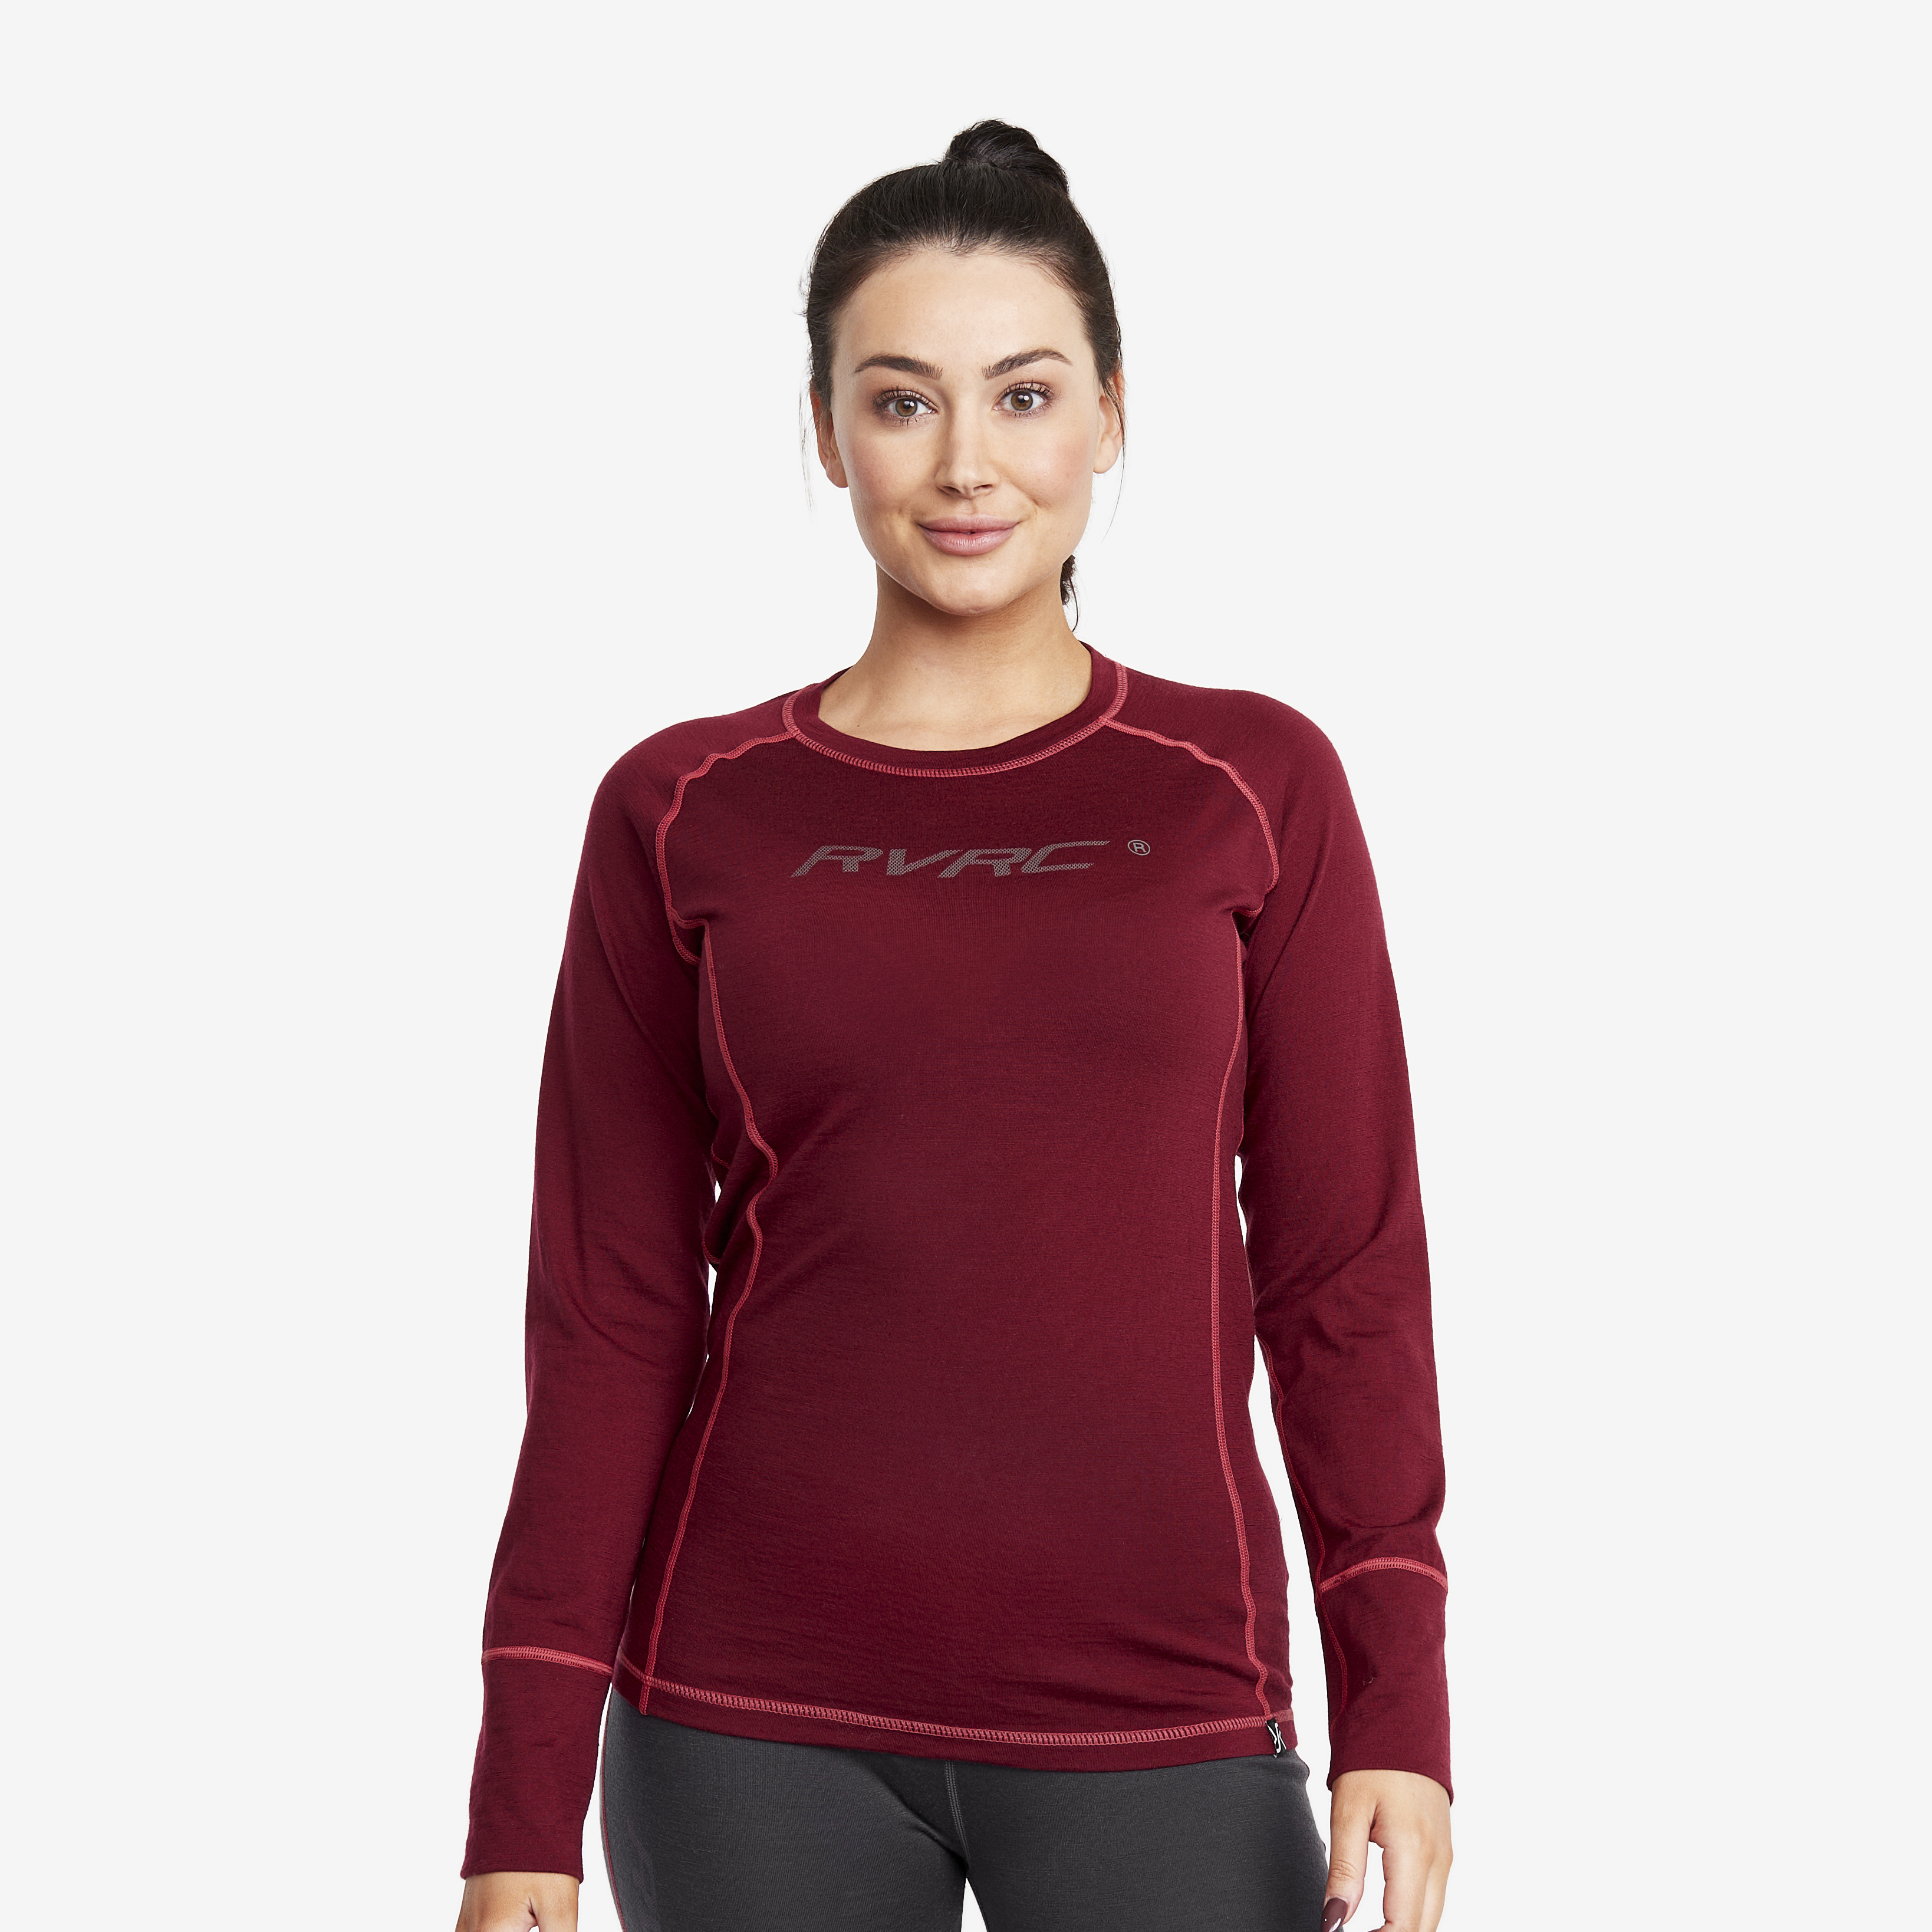 Outright Merino Top Bison Red/ Anthracite Mujeres